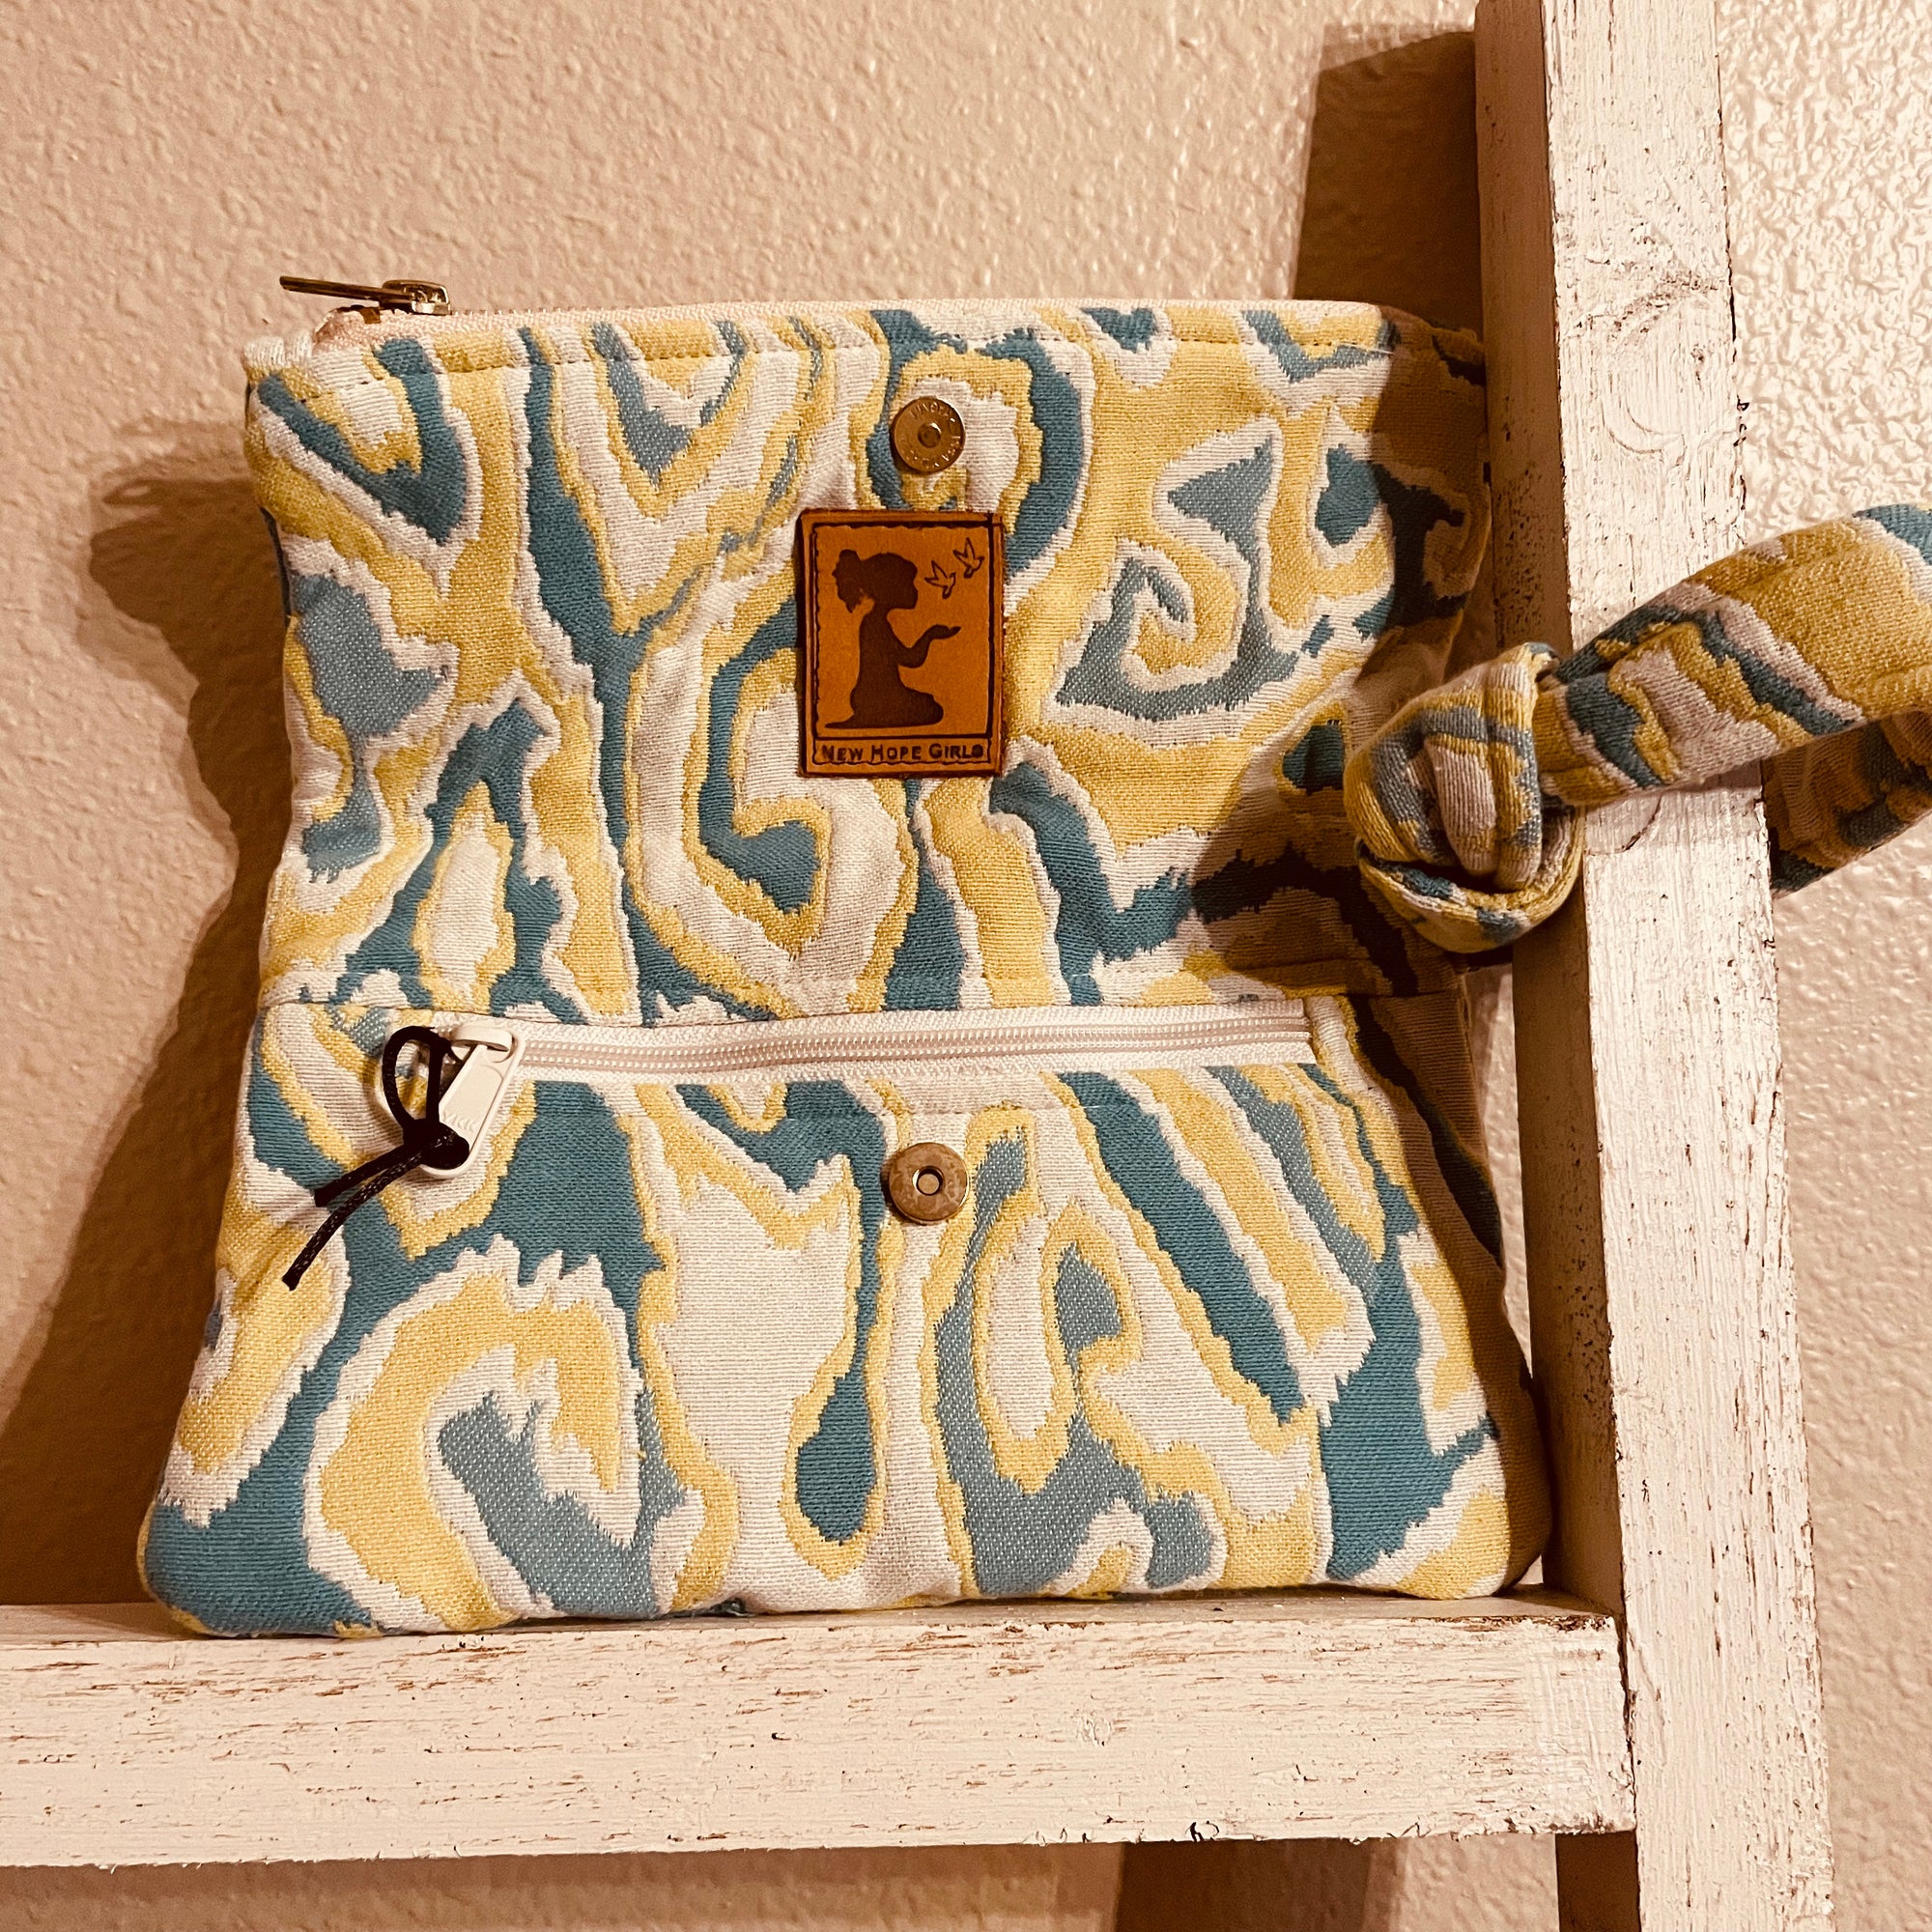 New Hope Girl Clutch Blue & Yellow